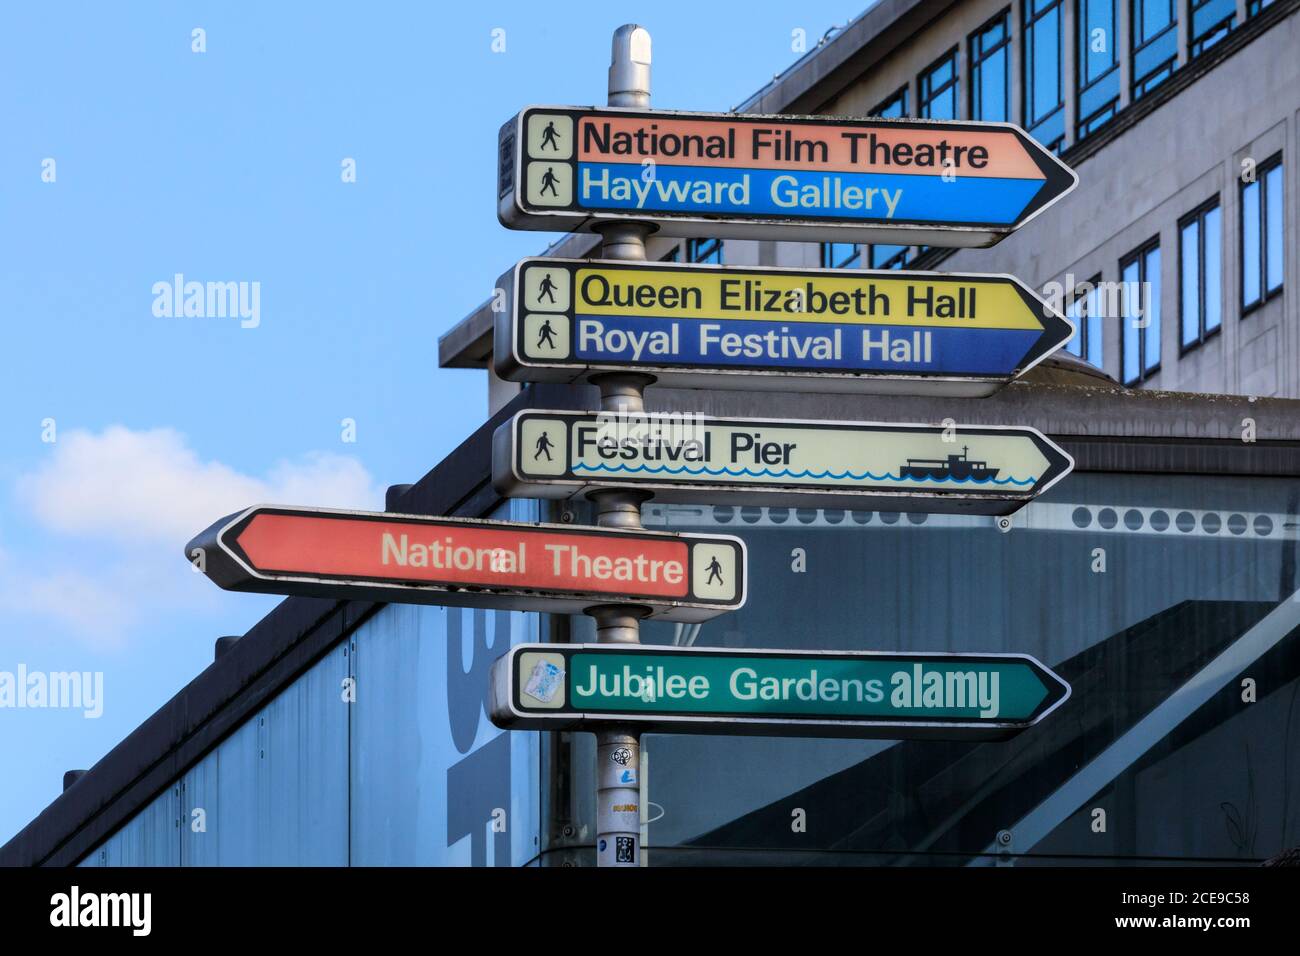 Tourist signage and directions to cultural venues, theatres and concert halls in the South Bank, London, England, UK Stock Photo